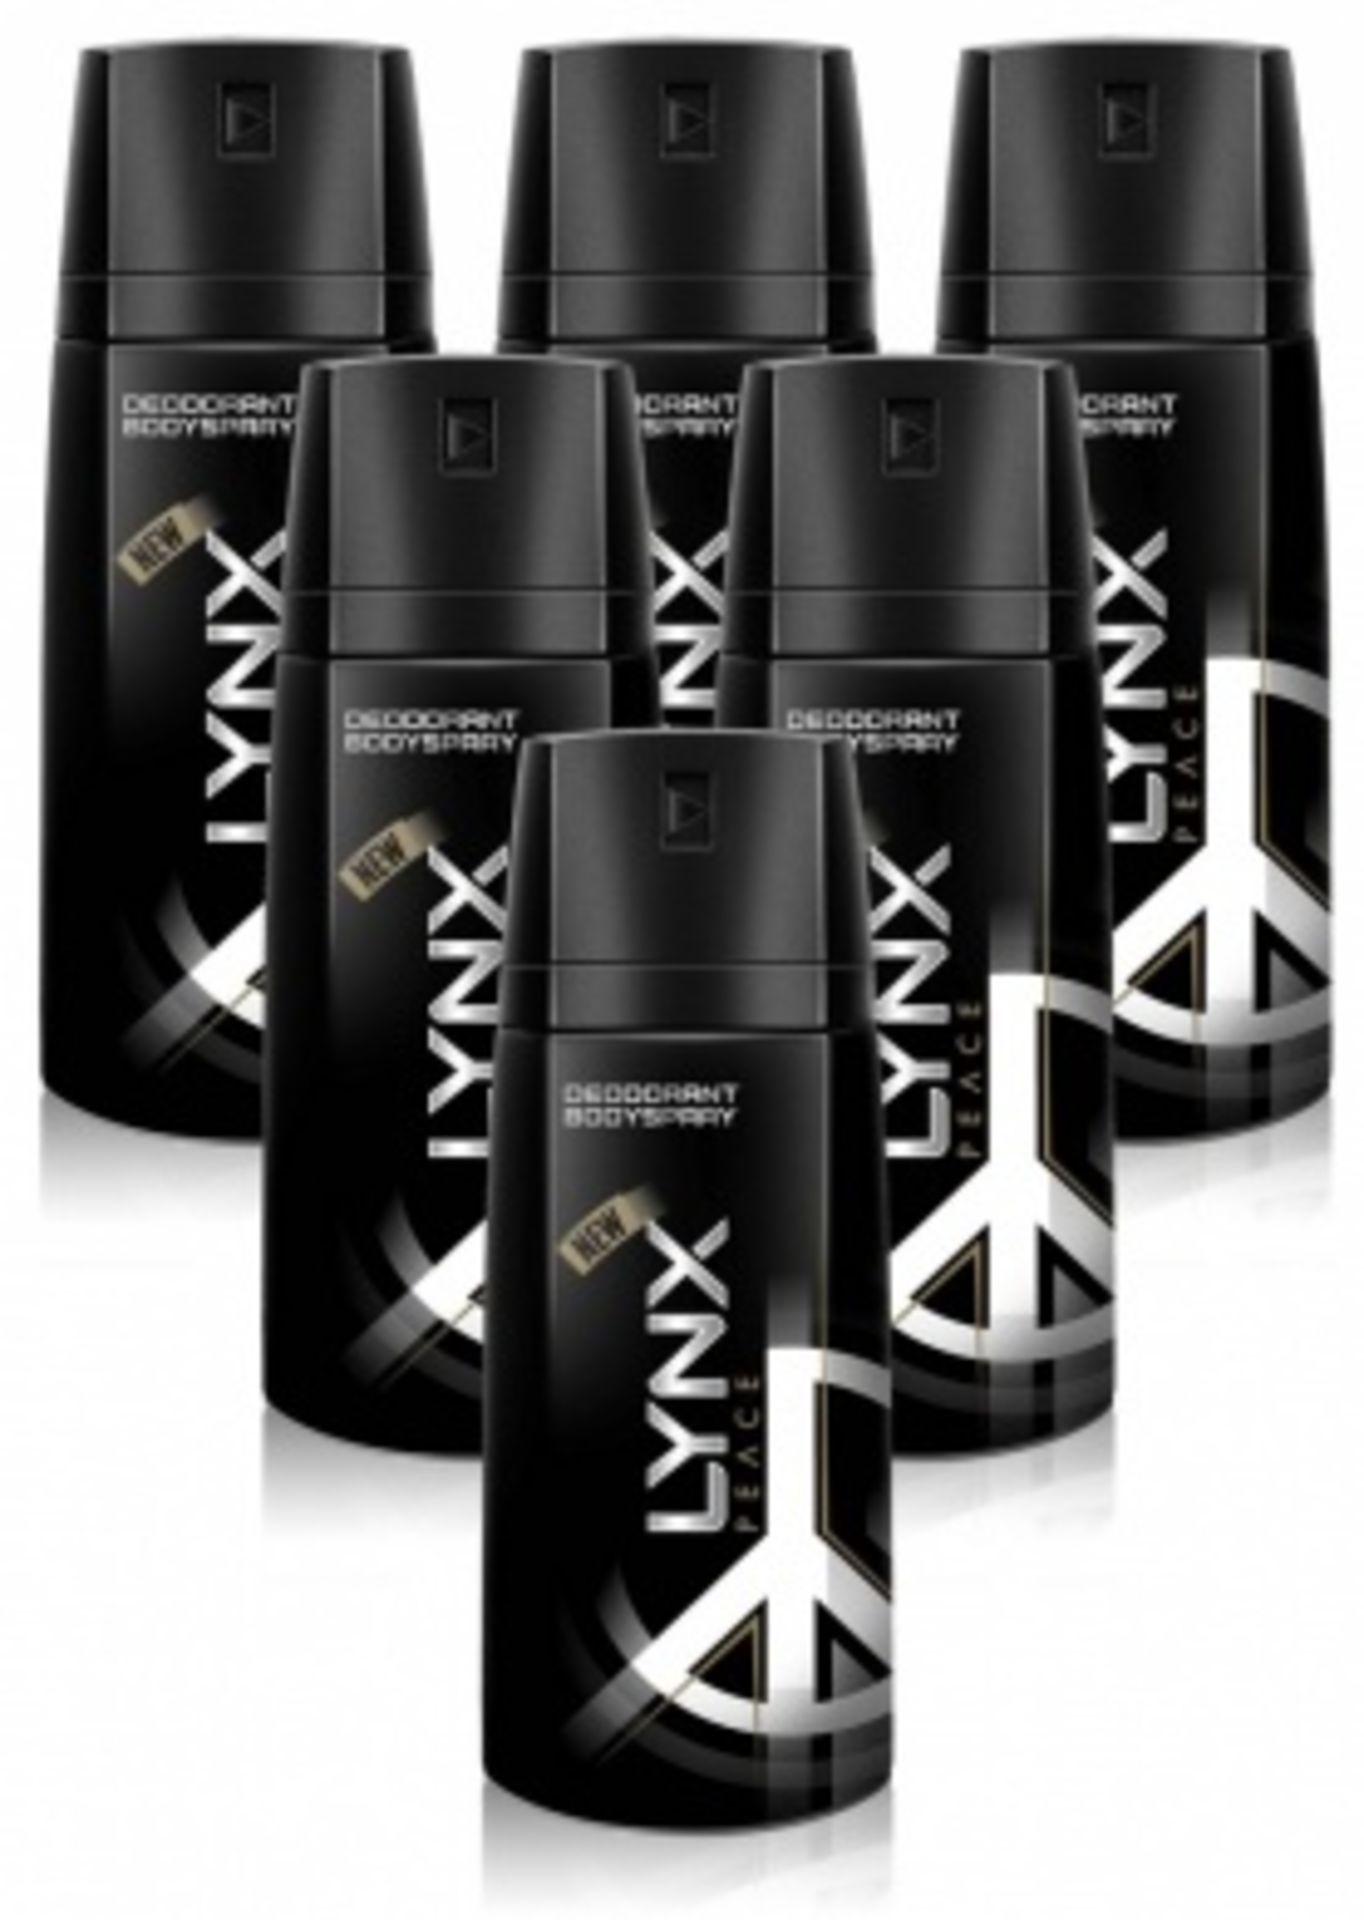 V Brand New 6 x Lynx (Axe) Peace Deodorant Body Spray 150ml Total ISP For 6 £18.90 (Picture shows - Image 2 of 4